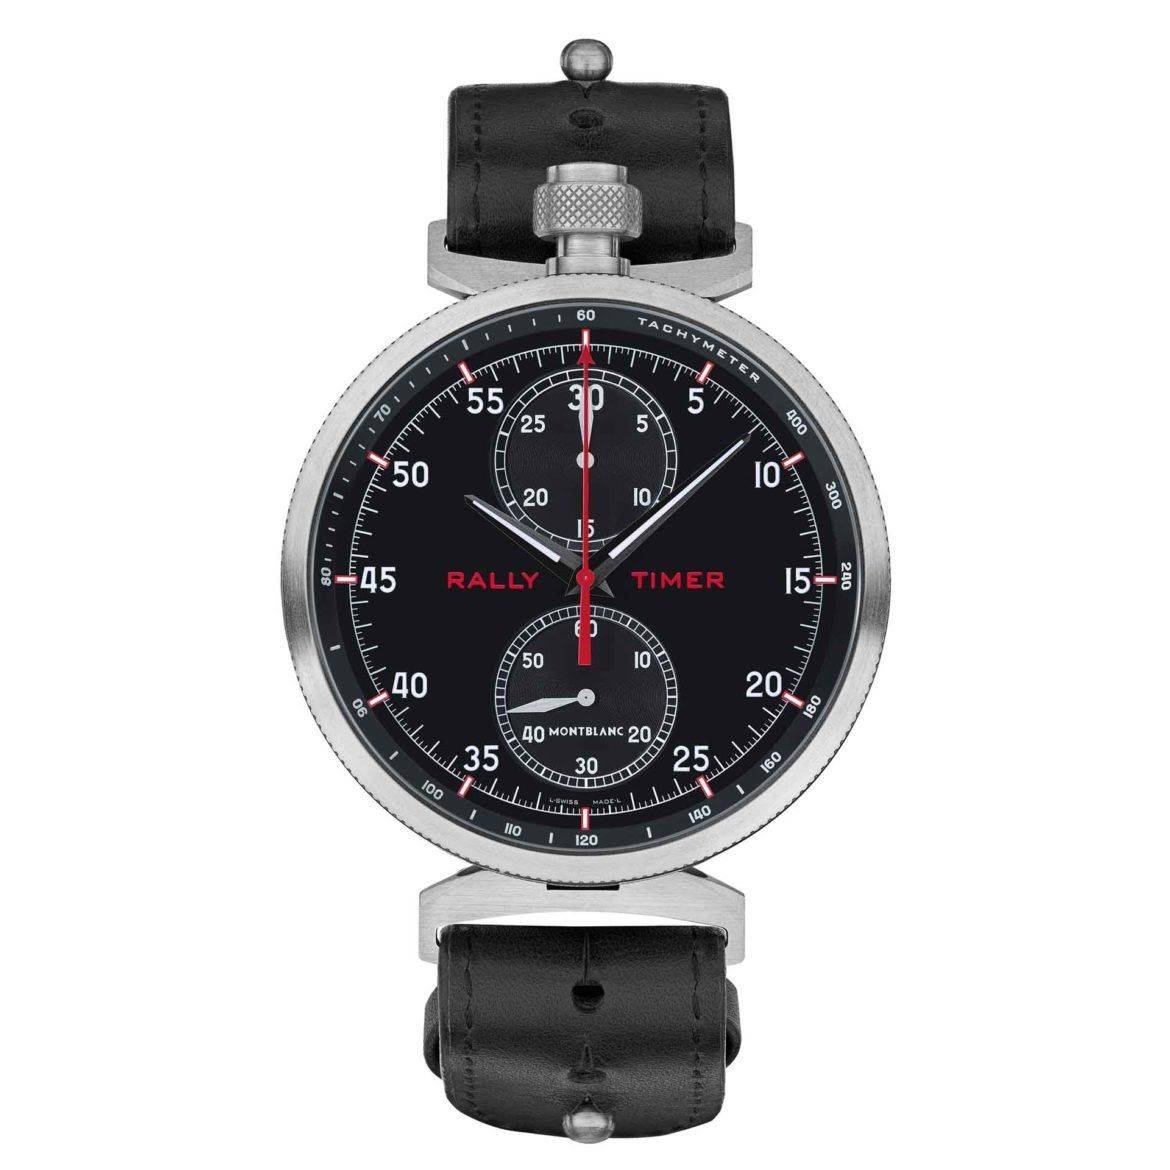 montblanc-timewalker-chronograph-rally-timer-counter-limited-edition-1170x1170.jpg